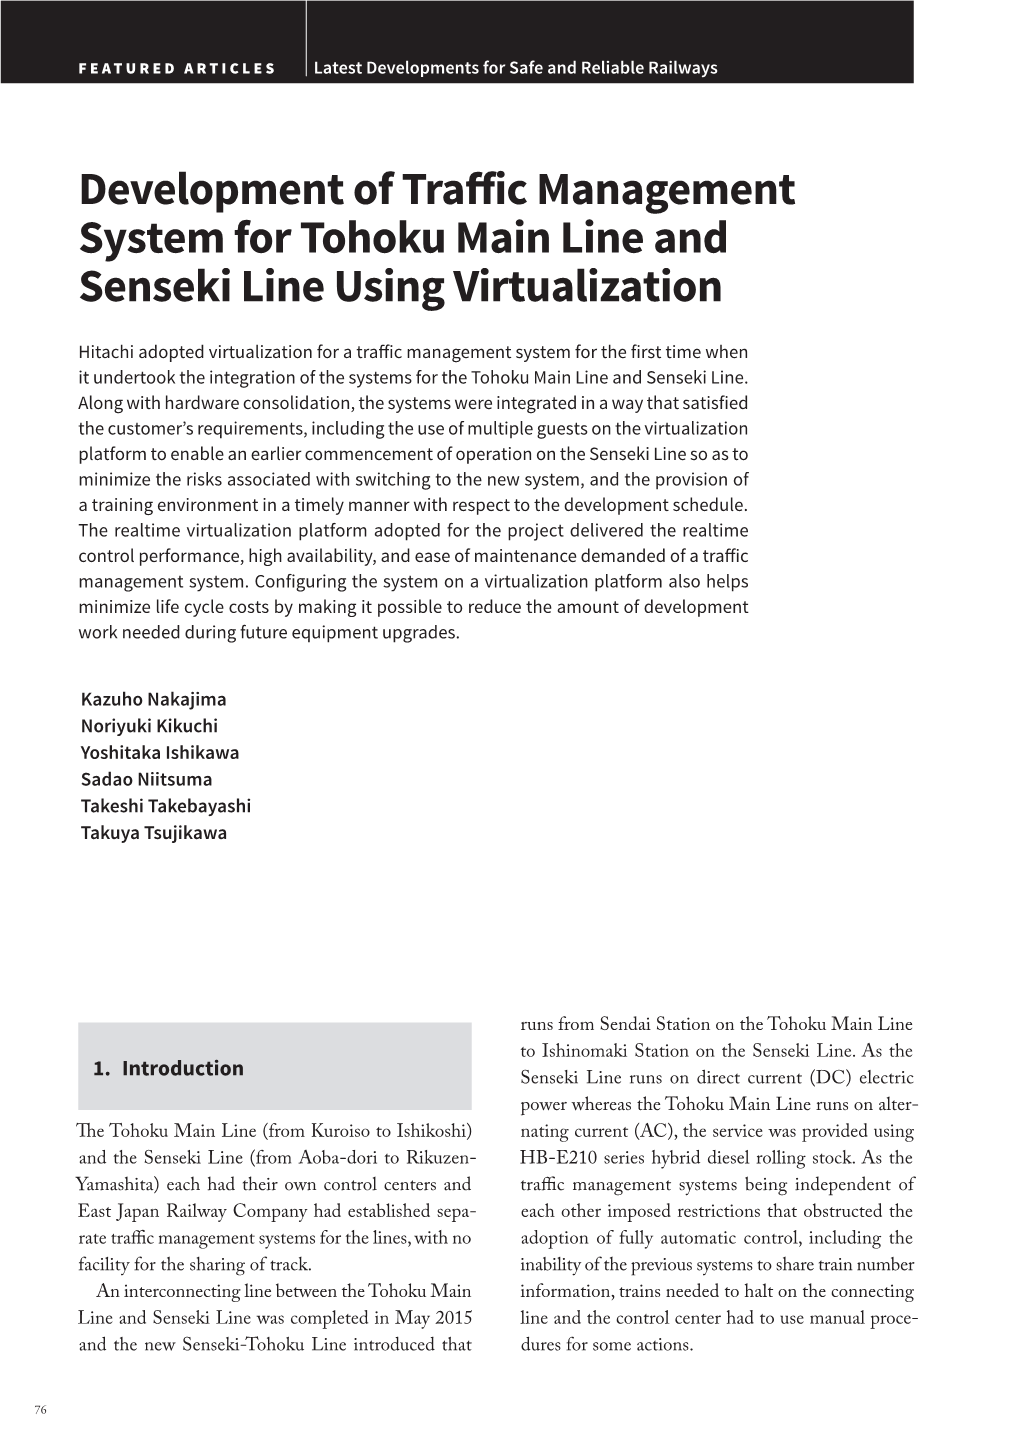 Development of Traffic Management System for Tohoku Main Line And